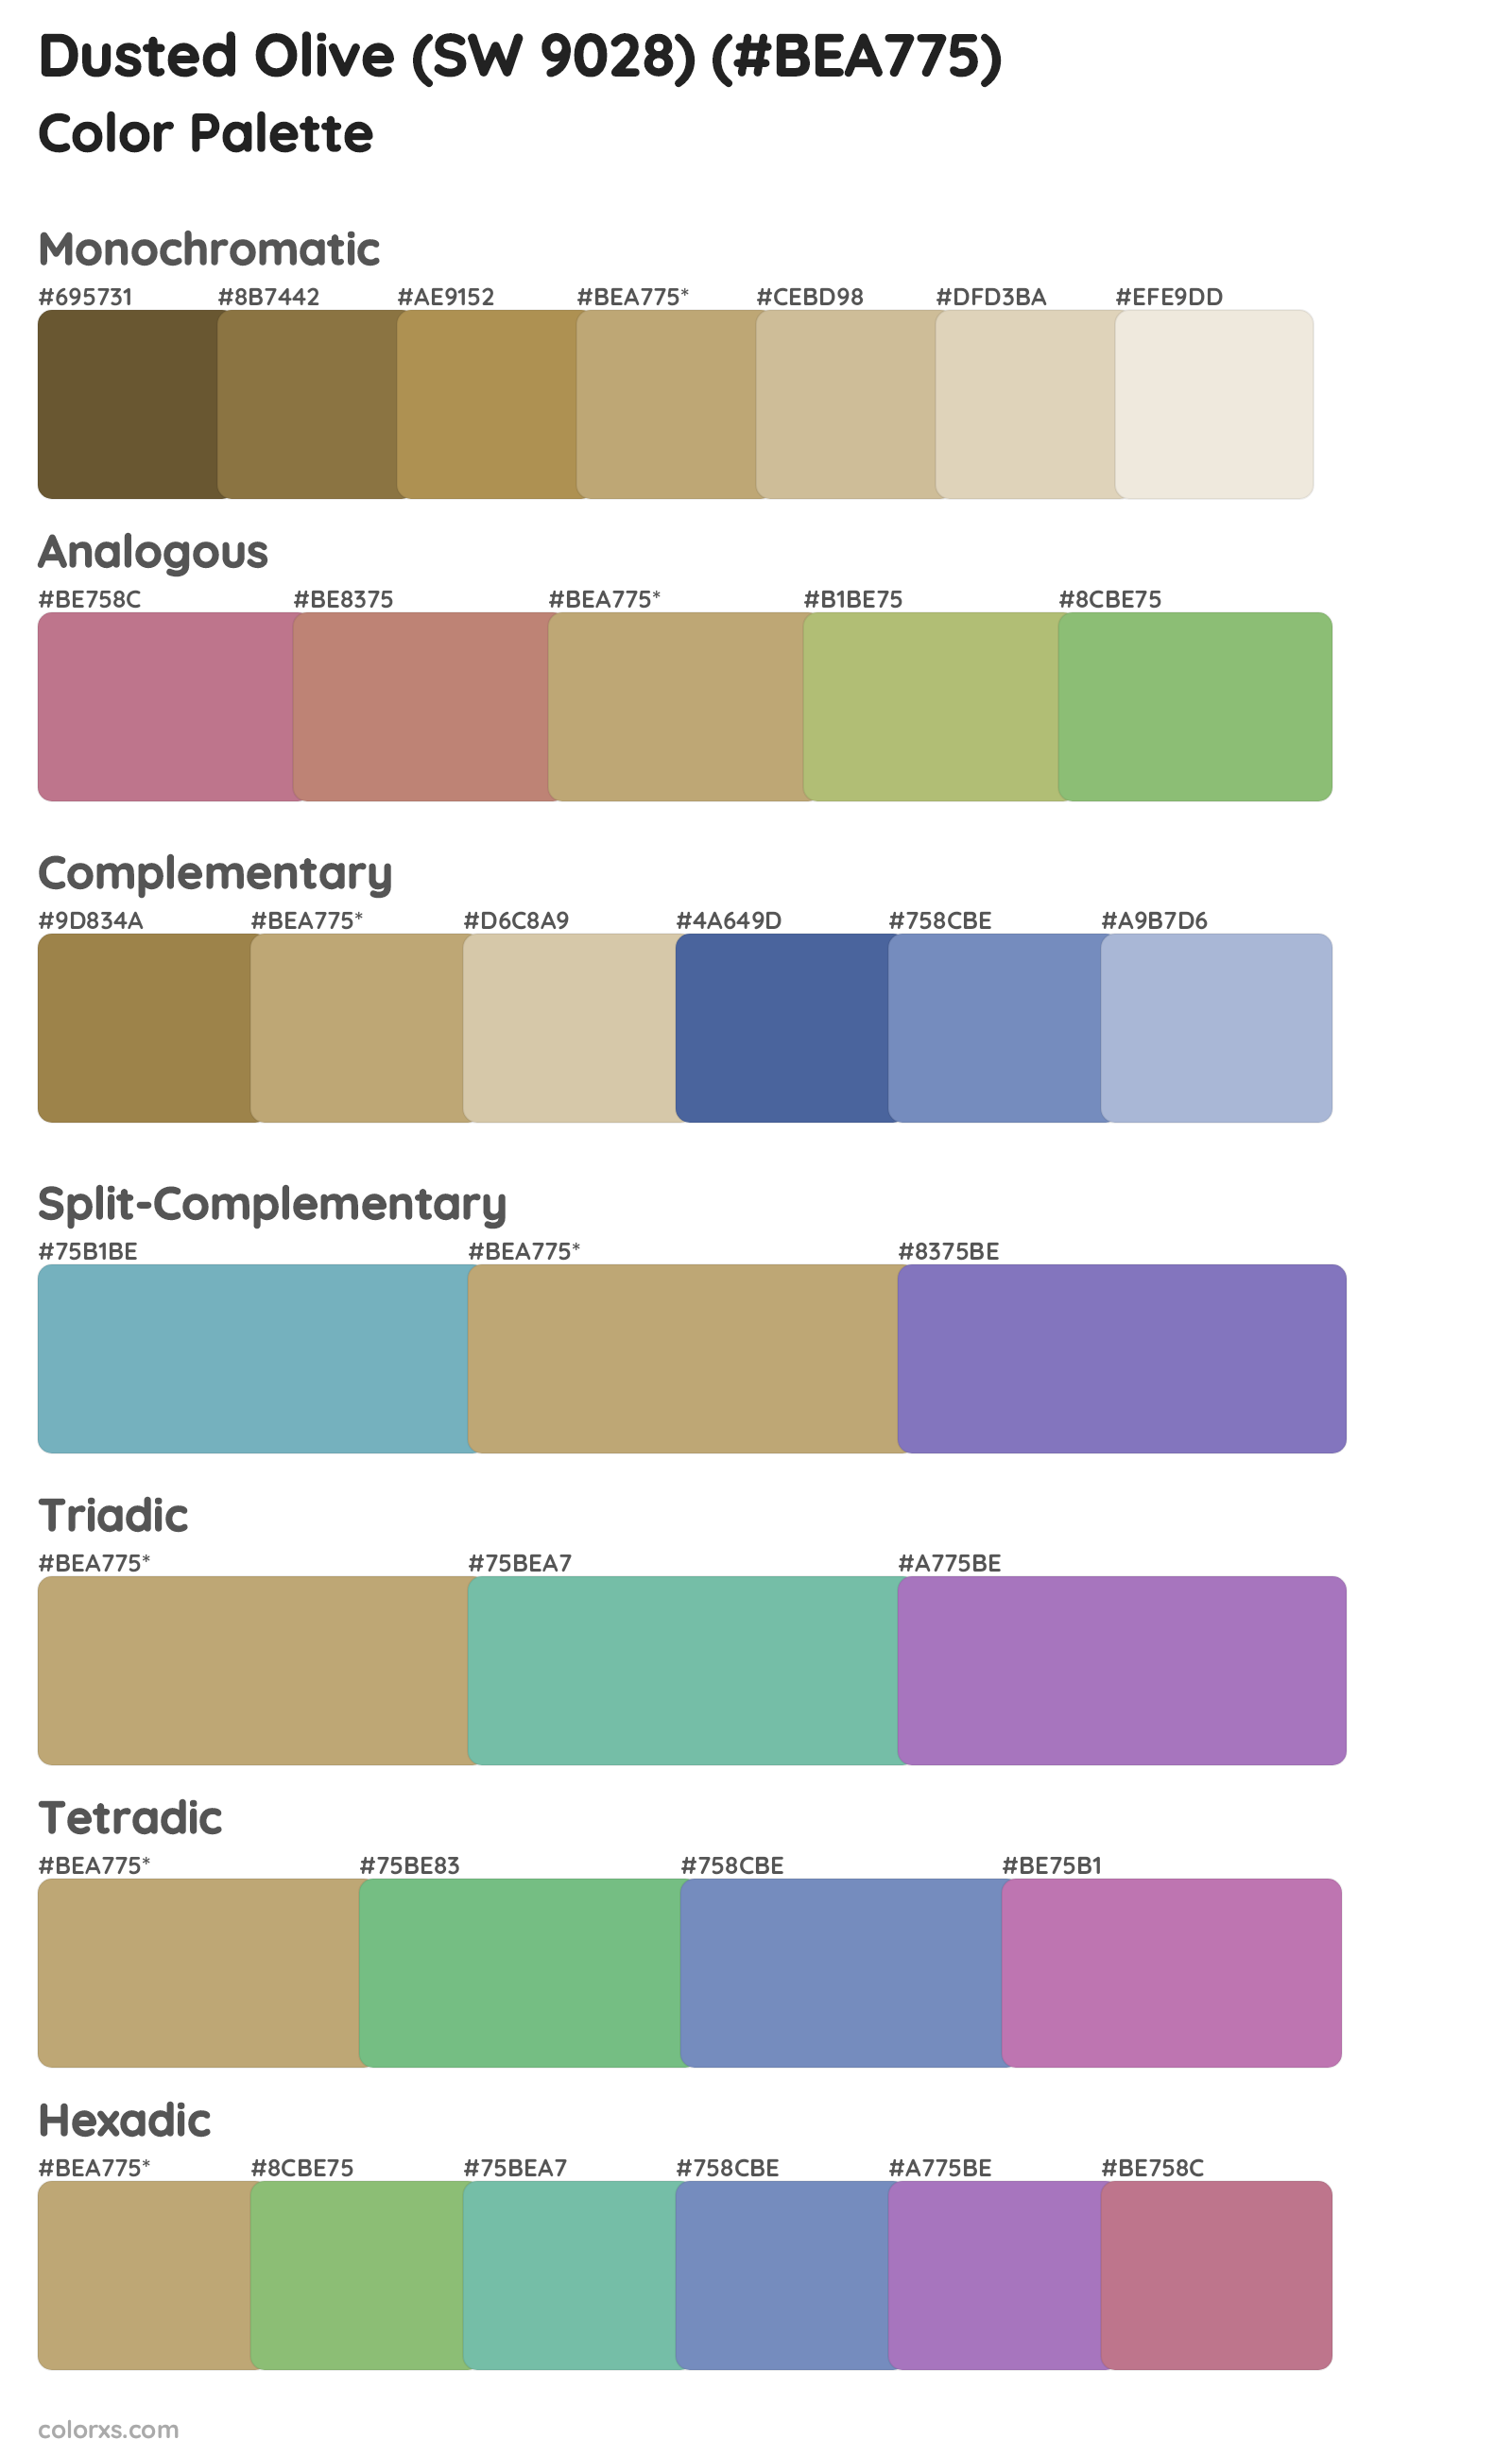 Dusted Olive (SW 9028) Color Scheme Palettes